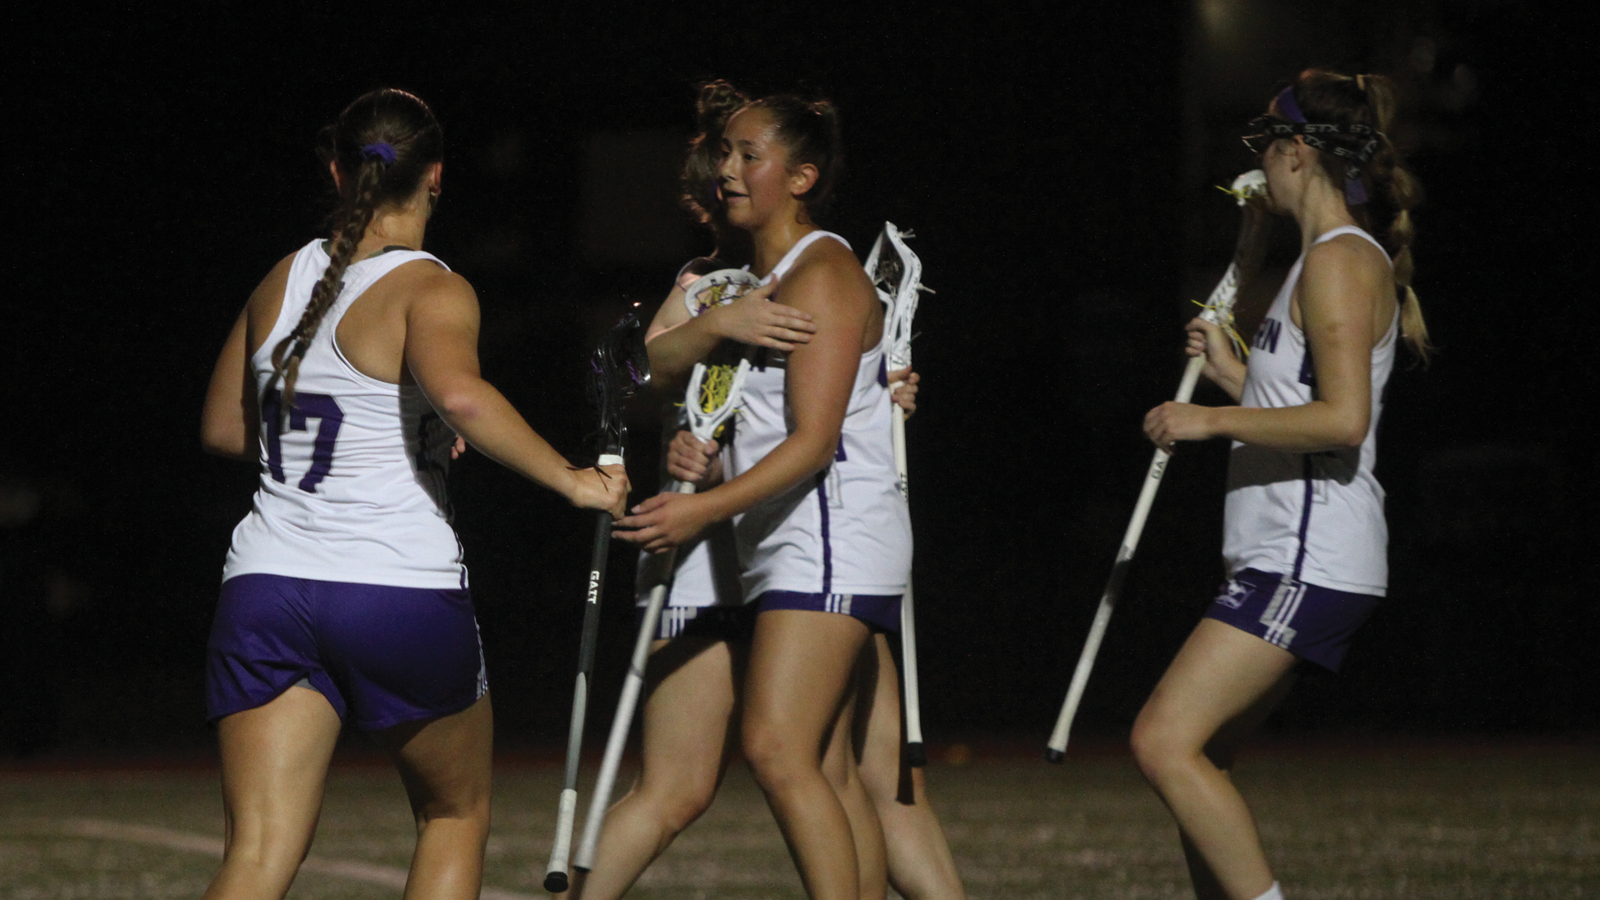 Four members of the Western women's lacrosse team celebrating after a goal with a night sky backdrop